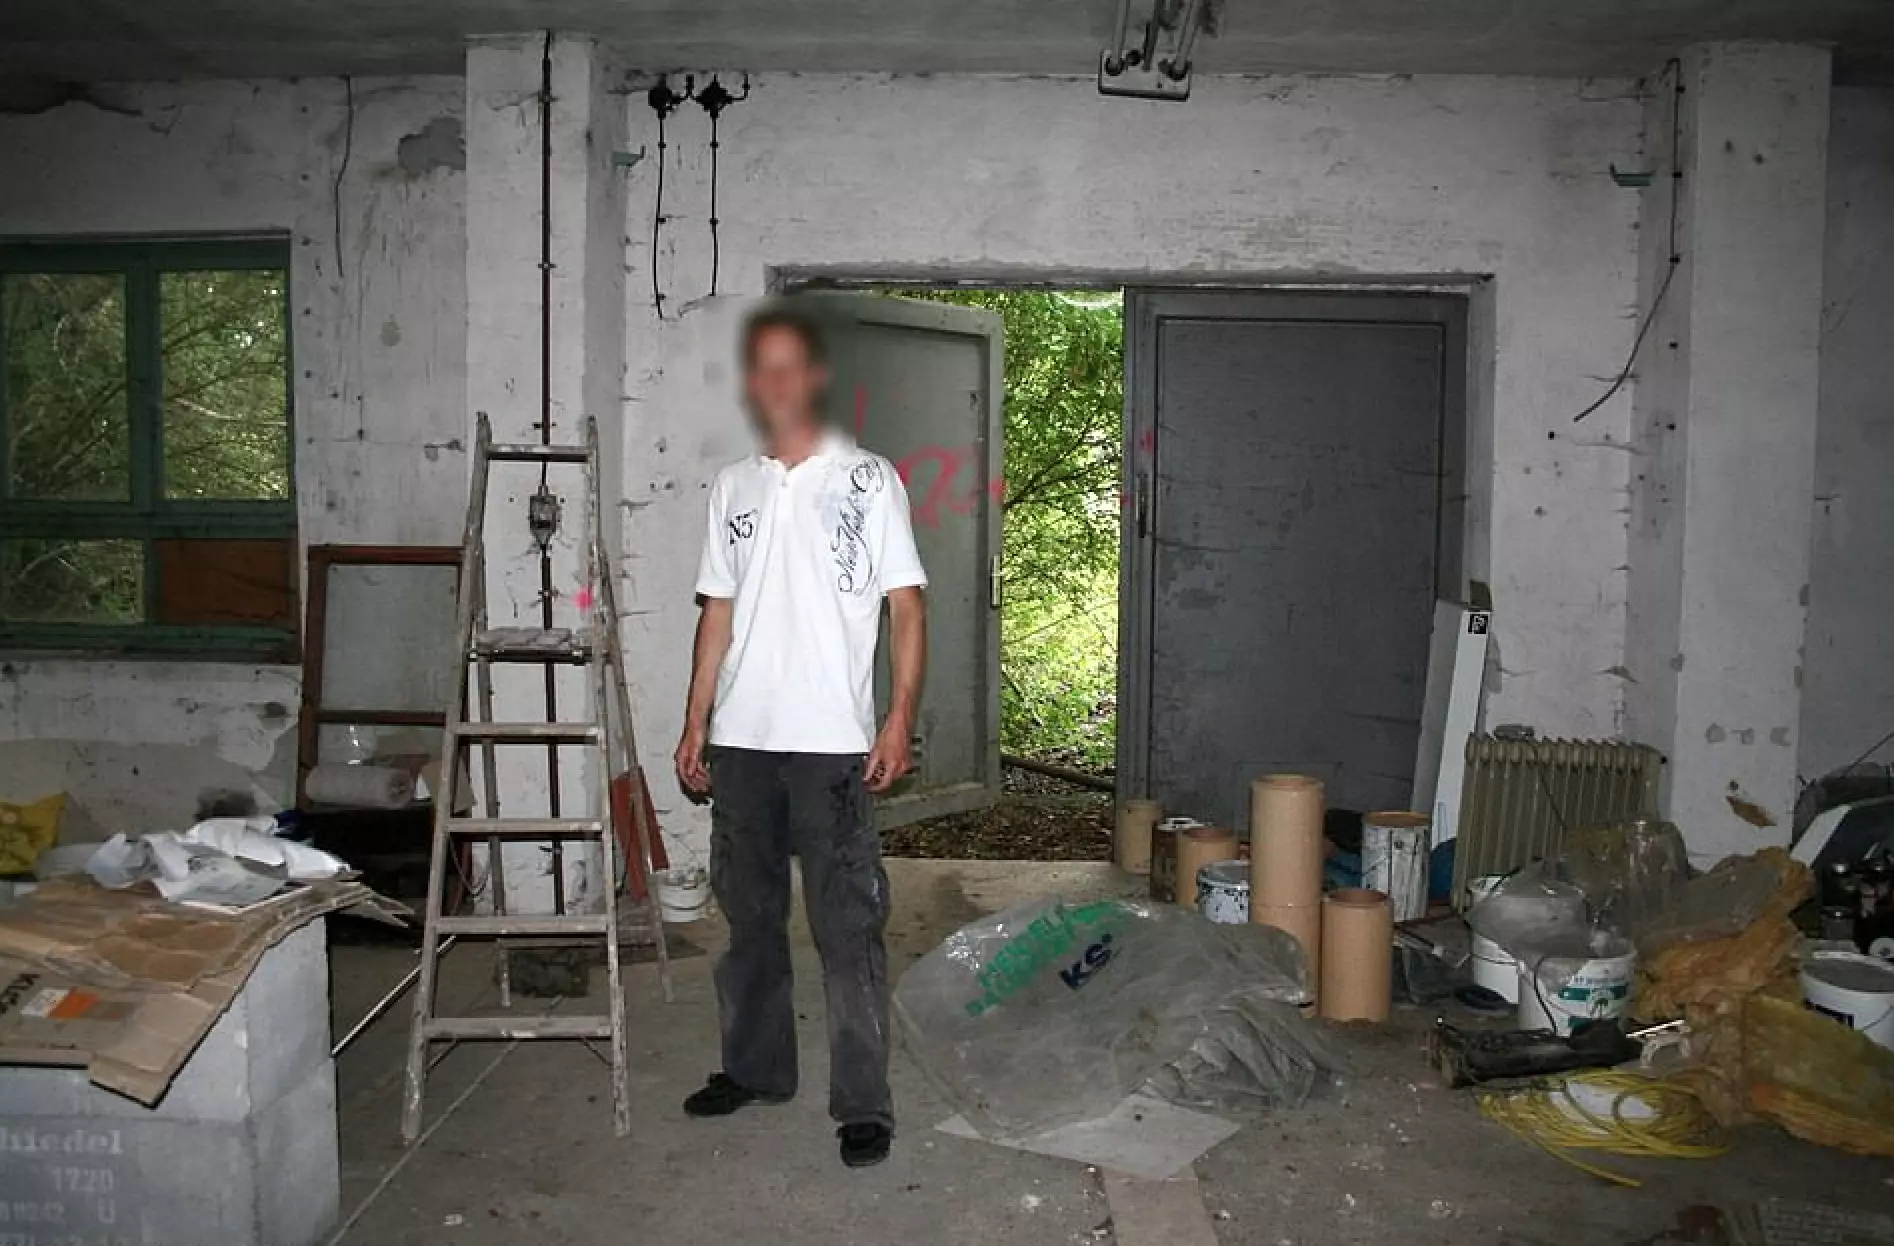 Christian B - pictured here in a disused factory where he said to have stored child porn - is currently being investigated (